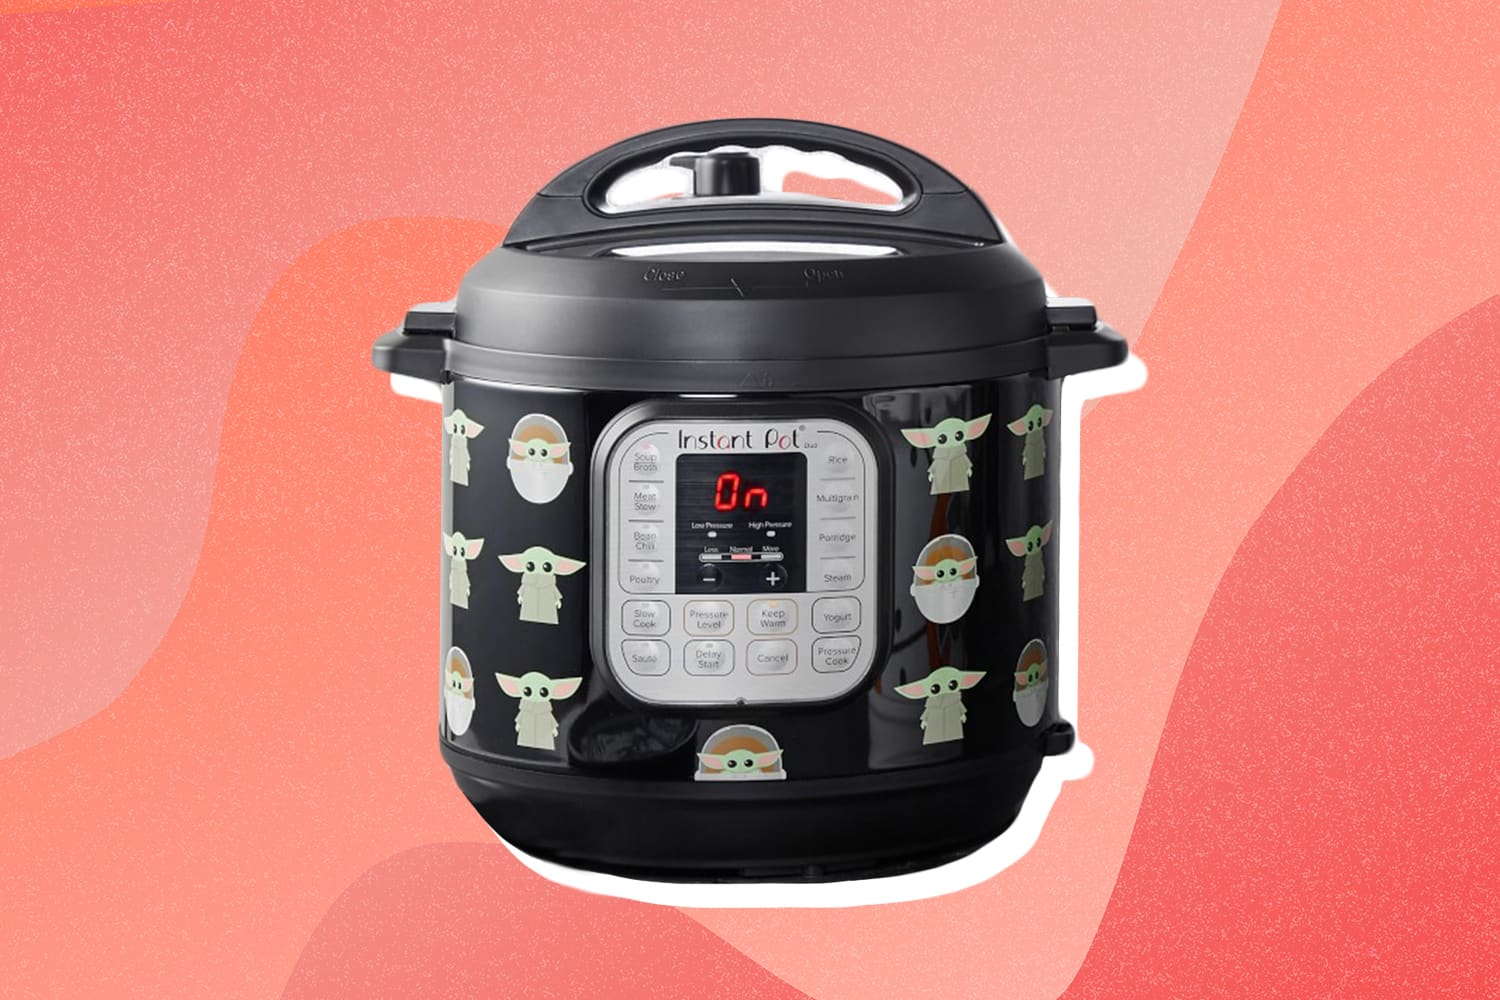 Instant Pot launches the R2-D2 Star Wars Multi Pressure Cooker